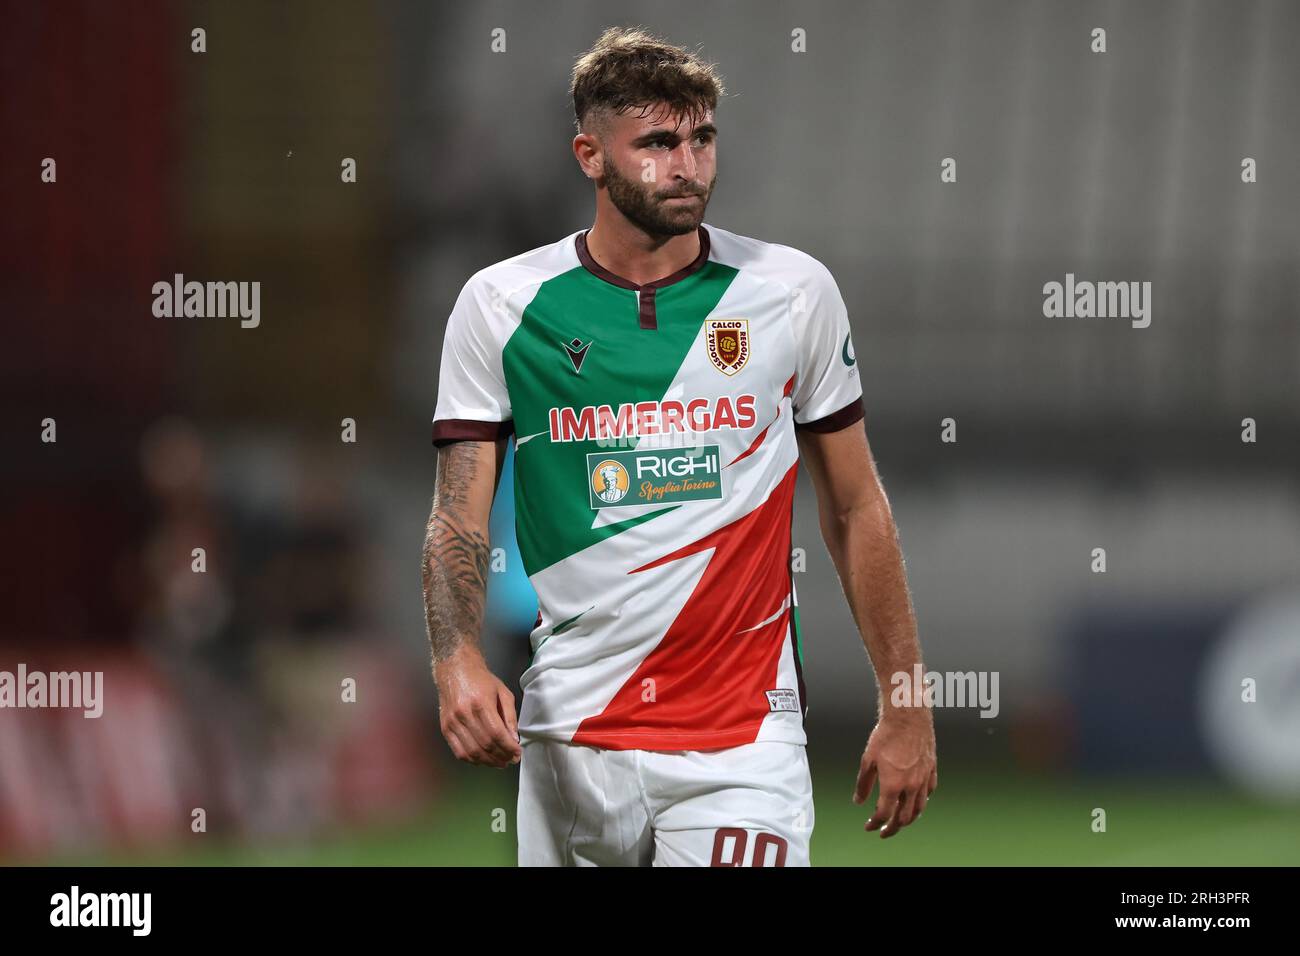 Ac monza v ac reggiana 1919 hi-res stock photography and images - Alamy